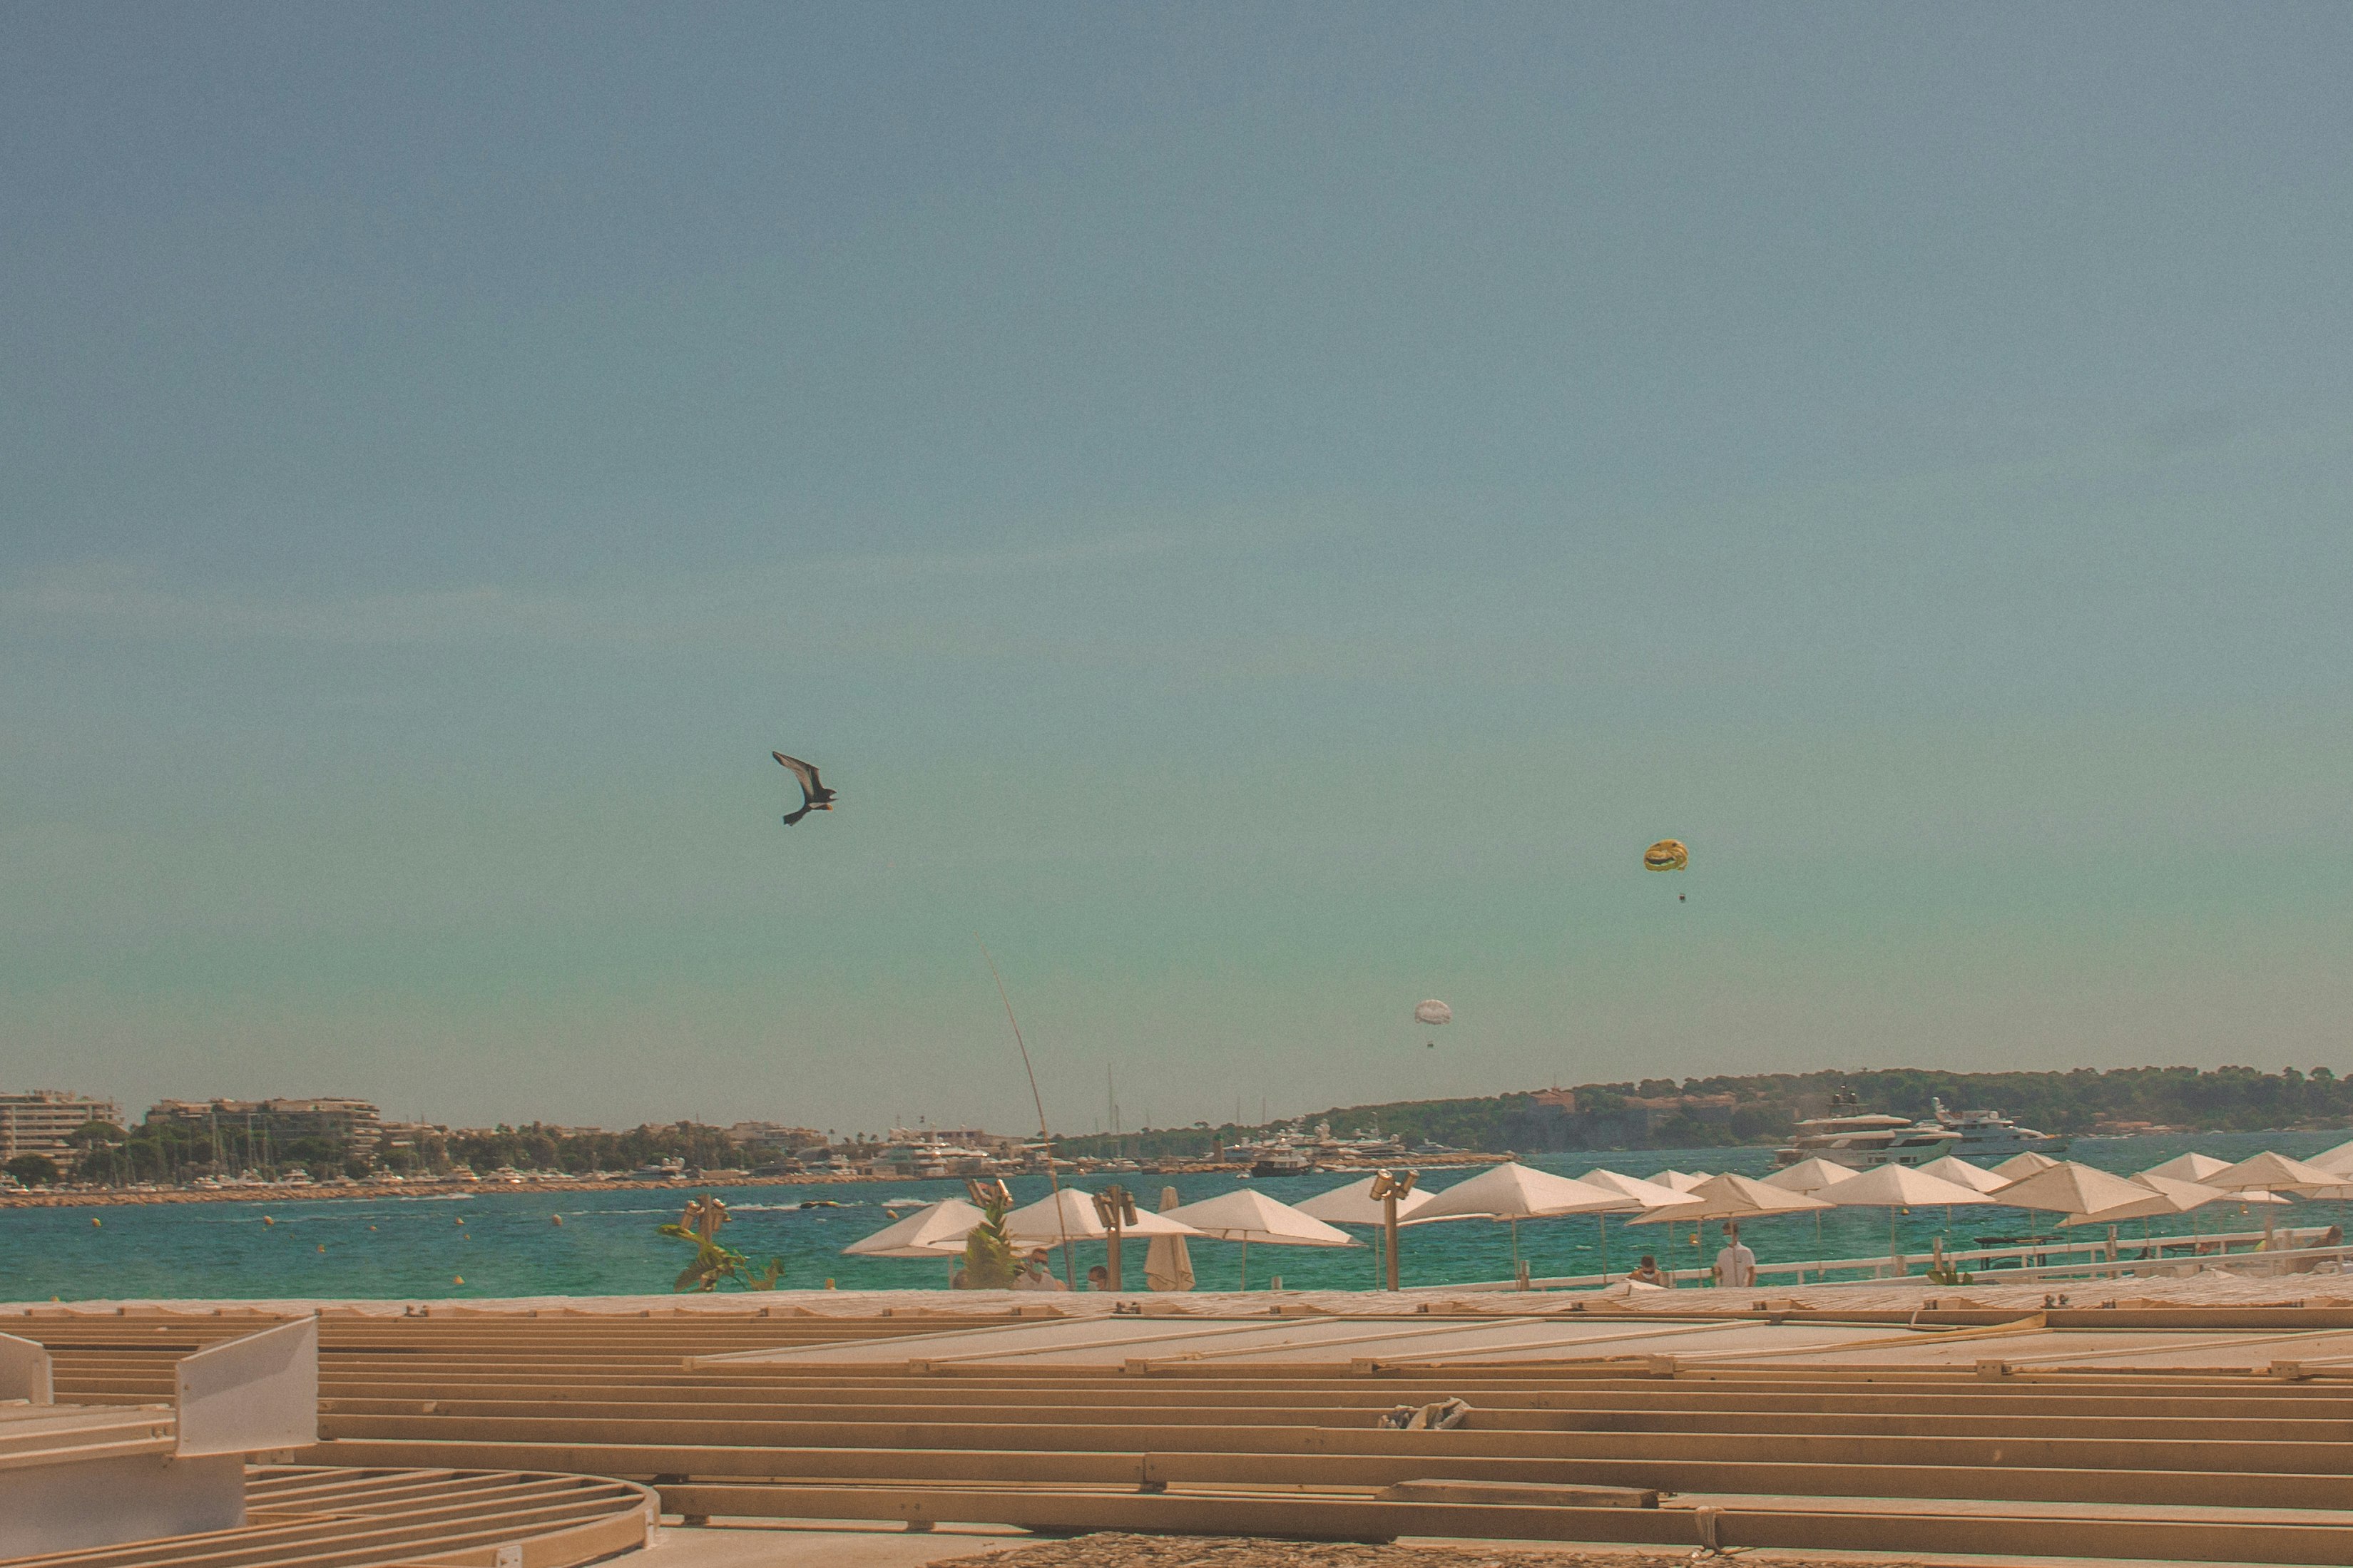 birds flying over the beach during daytime